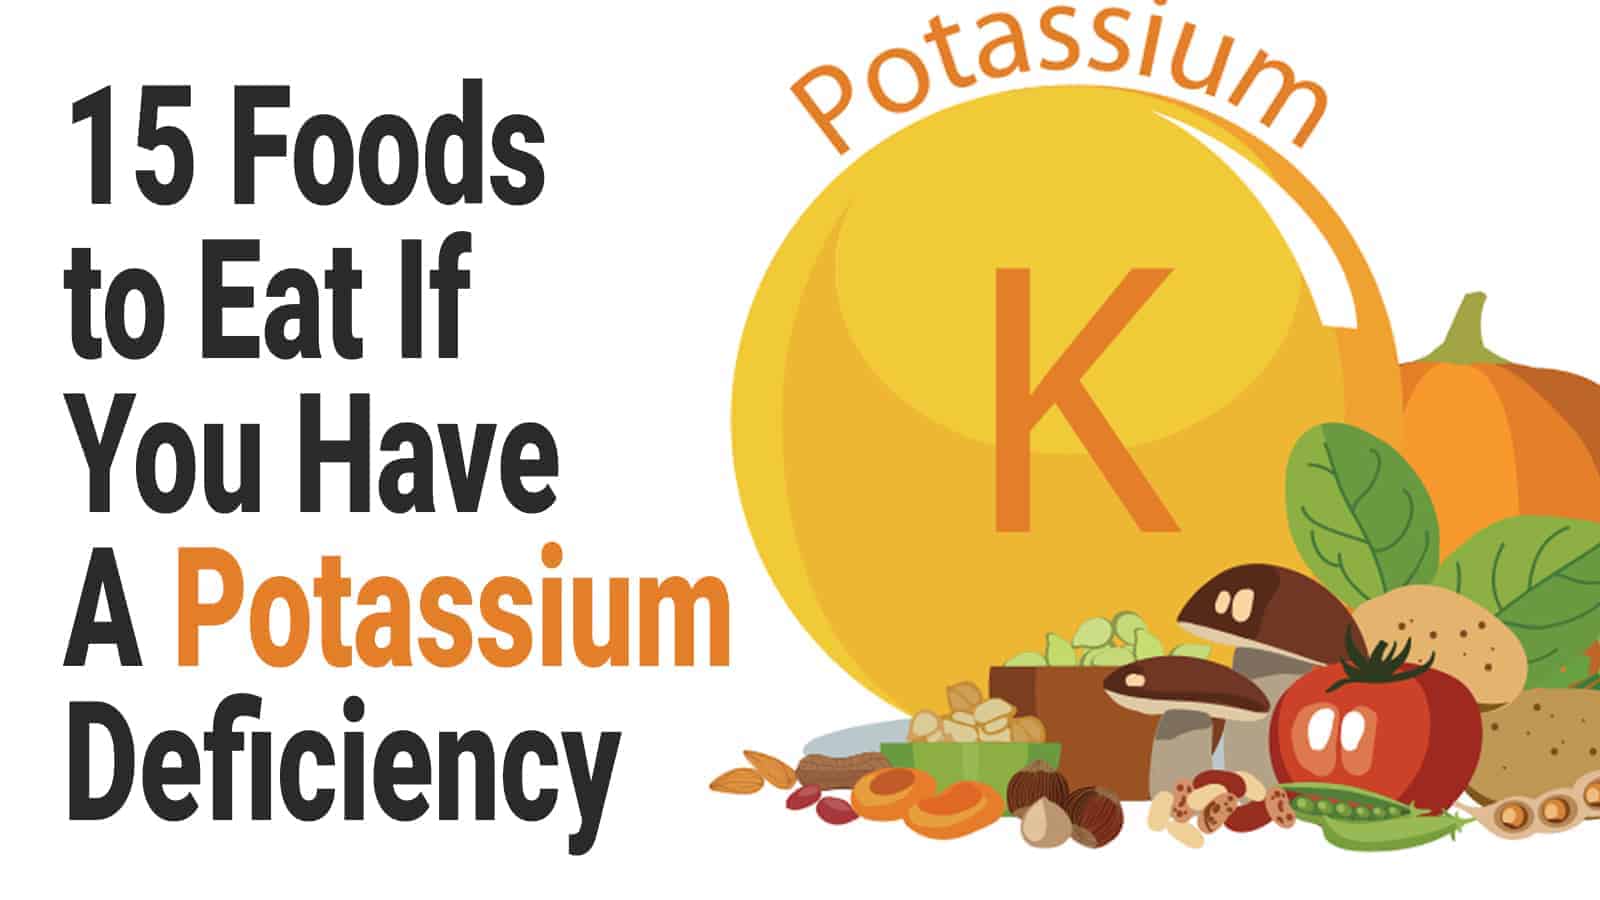 15 Foods to Eat If You Have A Potassium Deficiency